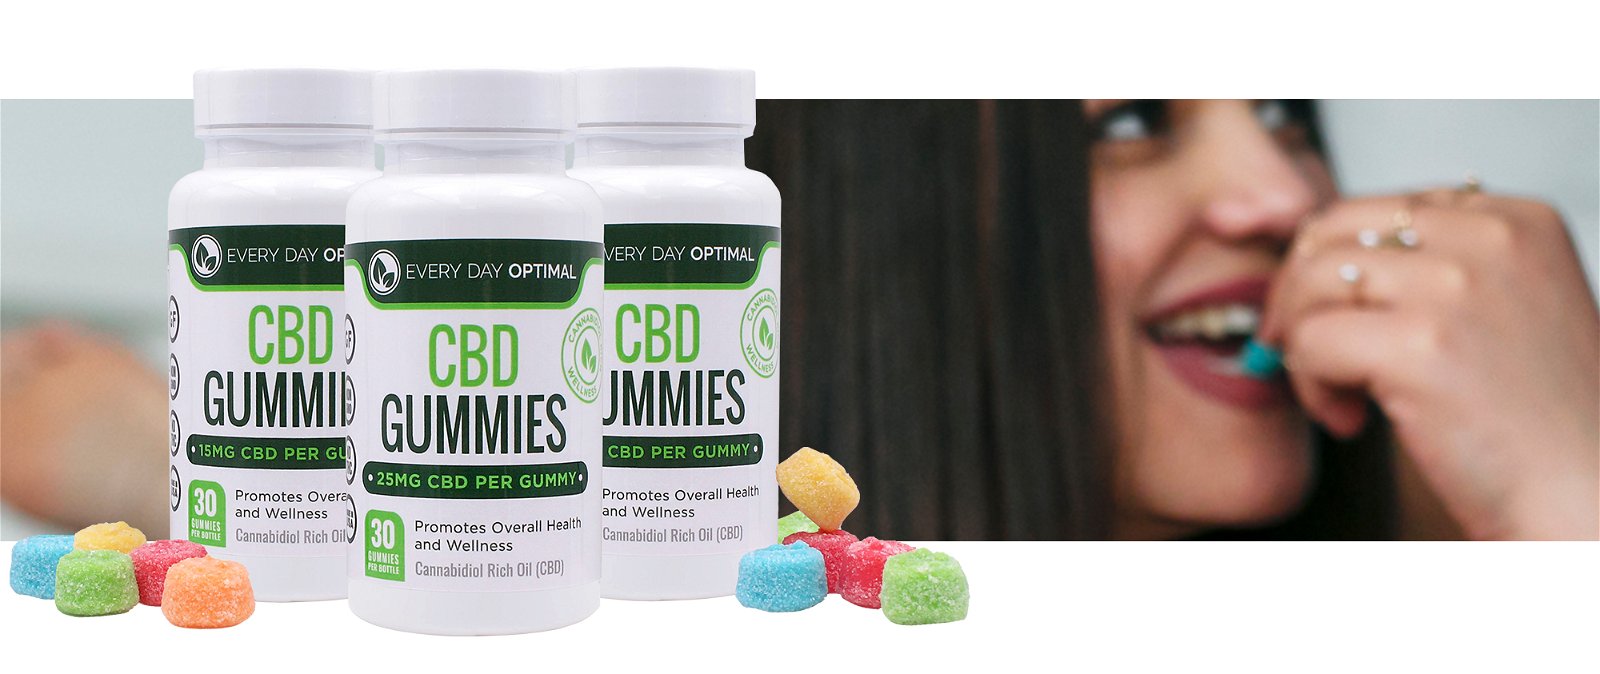 3 different potencies of CBD gummies sit side by side in front of a photo of a young woman eating a blue CBD gummy